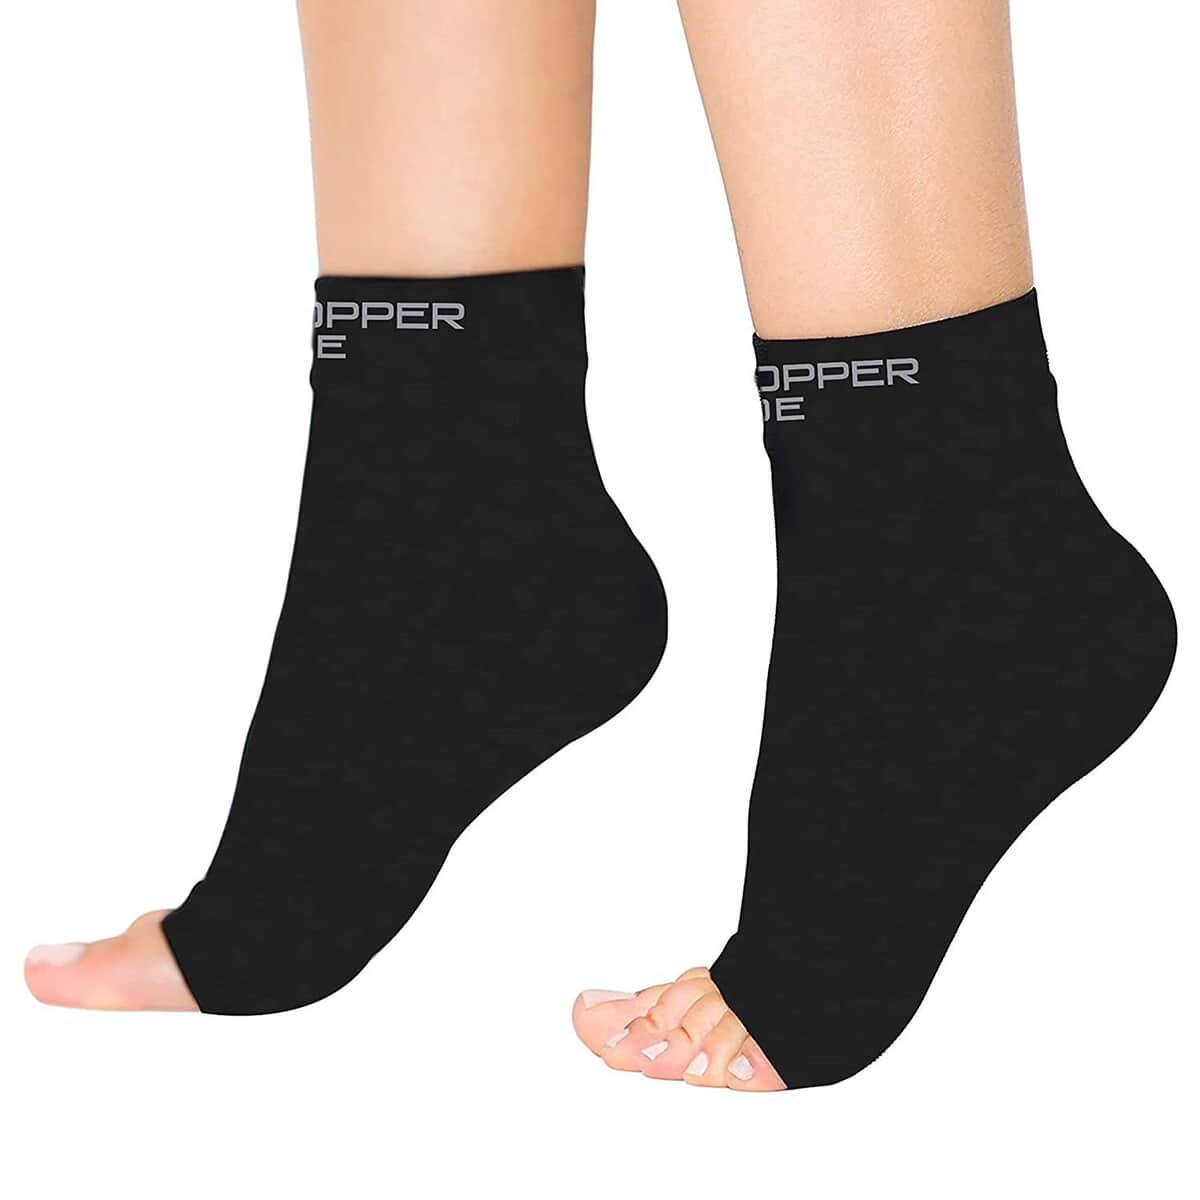 Copper Joe Compression Recovery Foot Sleeves/Support Socks 1 Pair (Small) image number 0